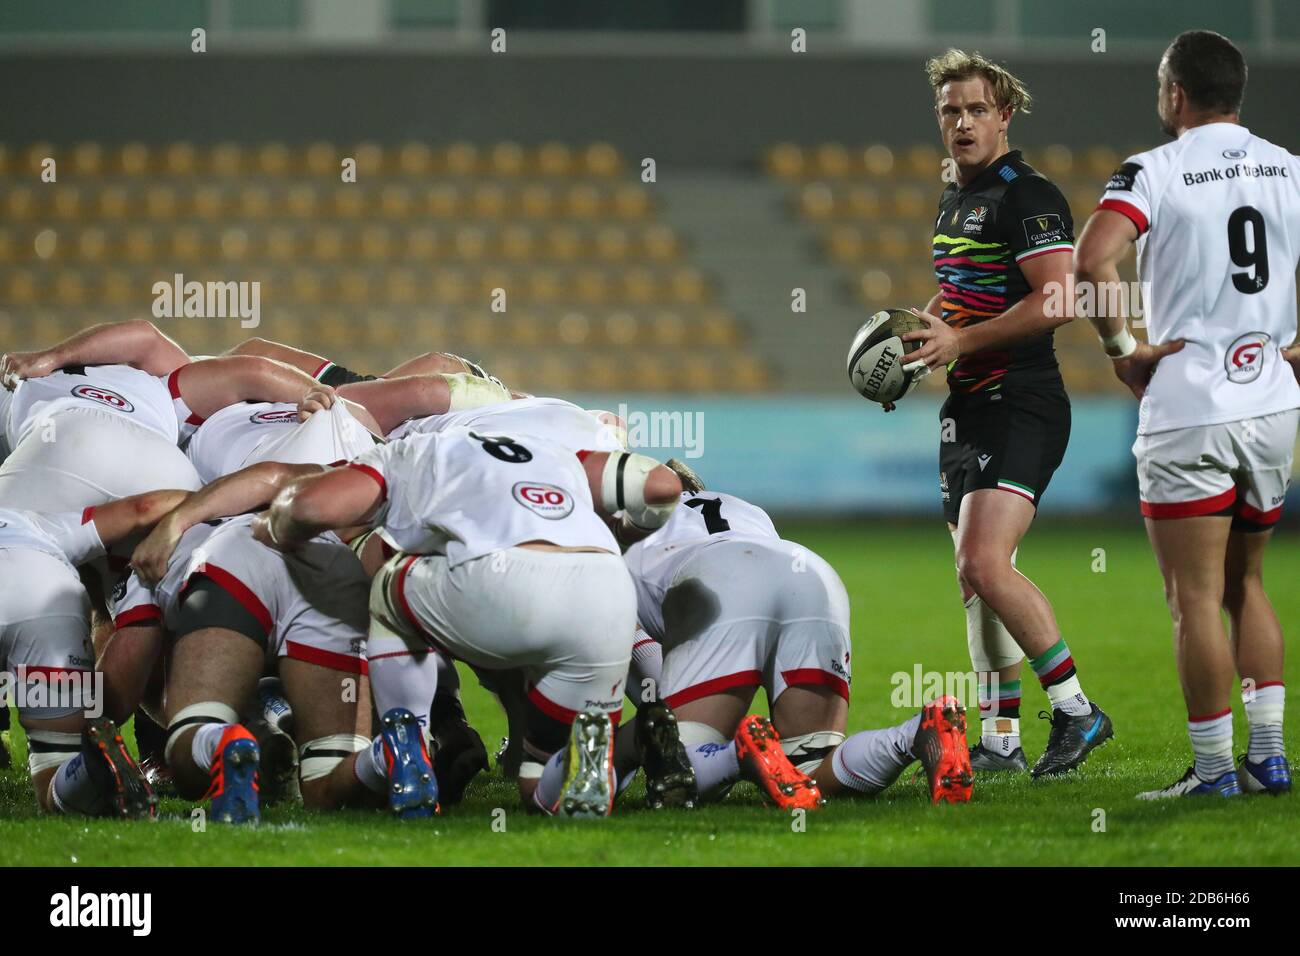 Sergio Lanfranchi stadium, Parma, Italy, 16 Nov 2020, Joshua Renton is ready for the scrum during Zebre Rugby vs Ulster Rugby, Rugby Guinness Pro 14 match - Photo Massimiliano Carnabuci / LM Stock Photo